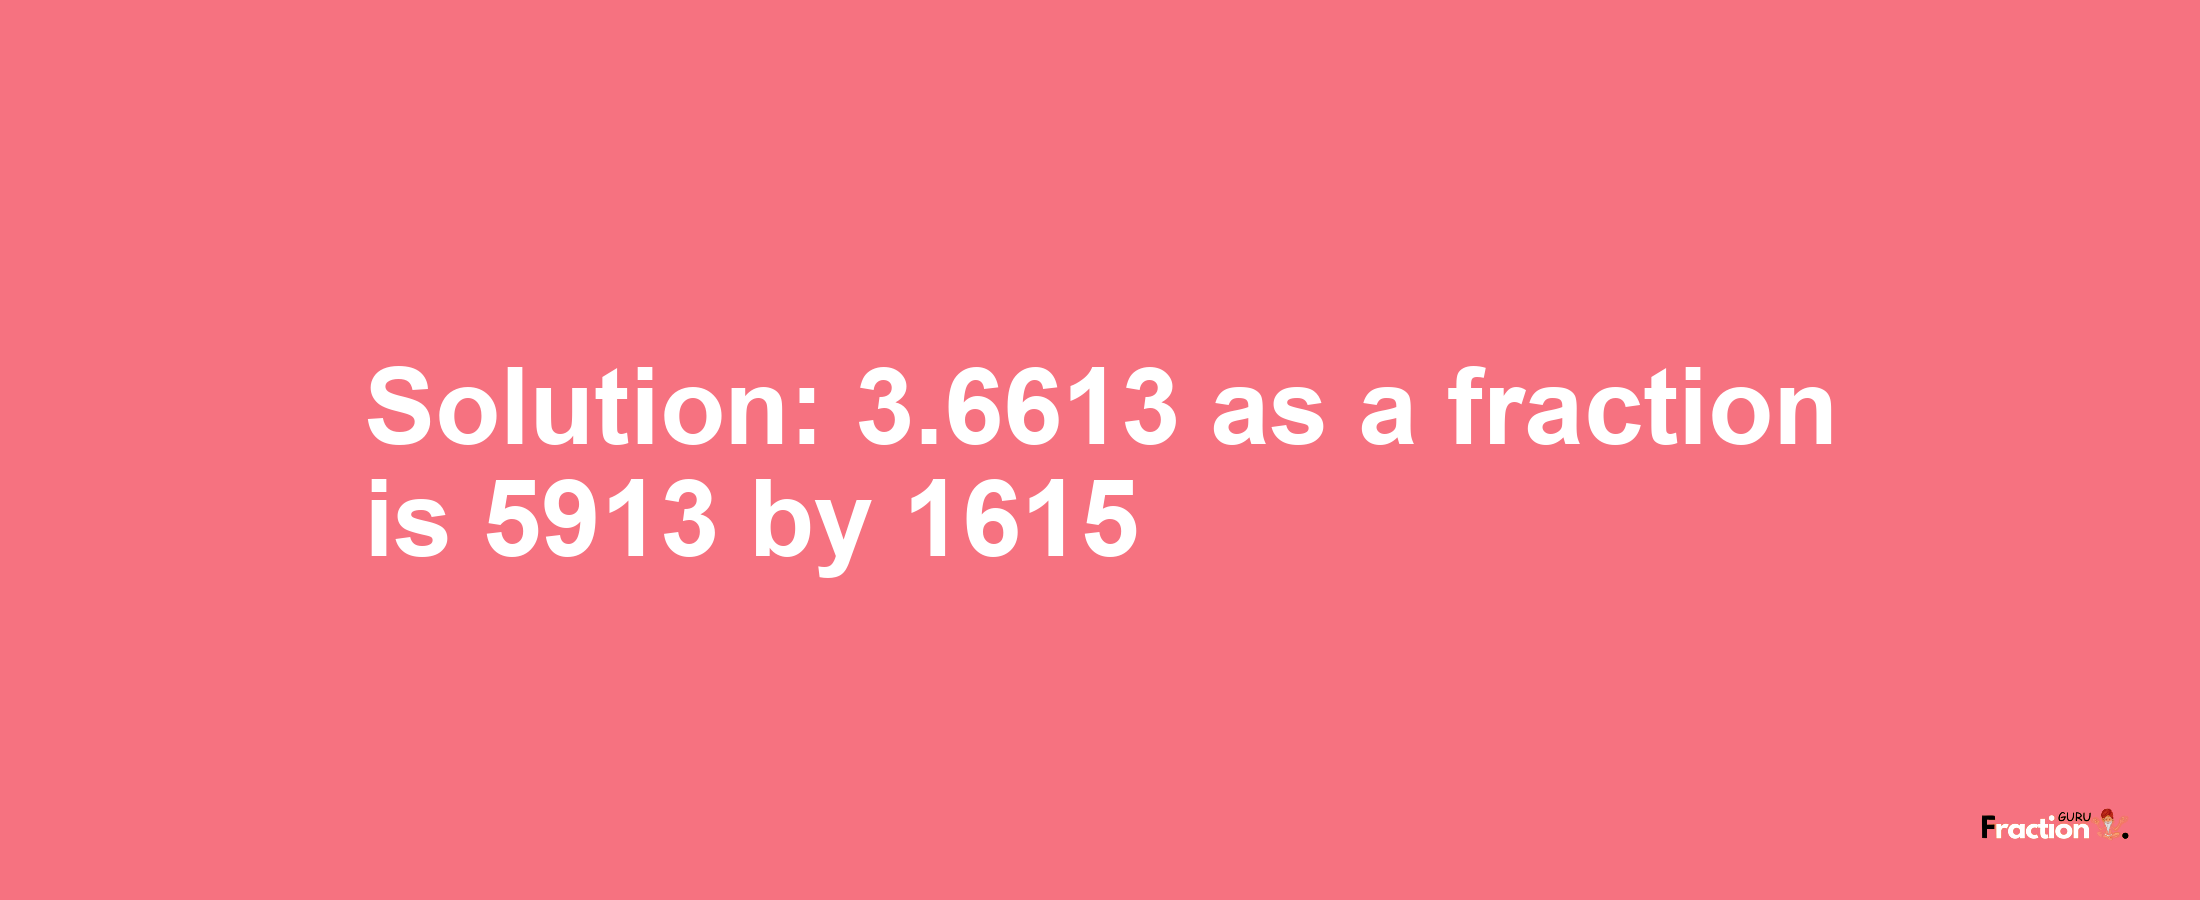 Solution:3.6613 as a fraction is 5913/1615